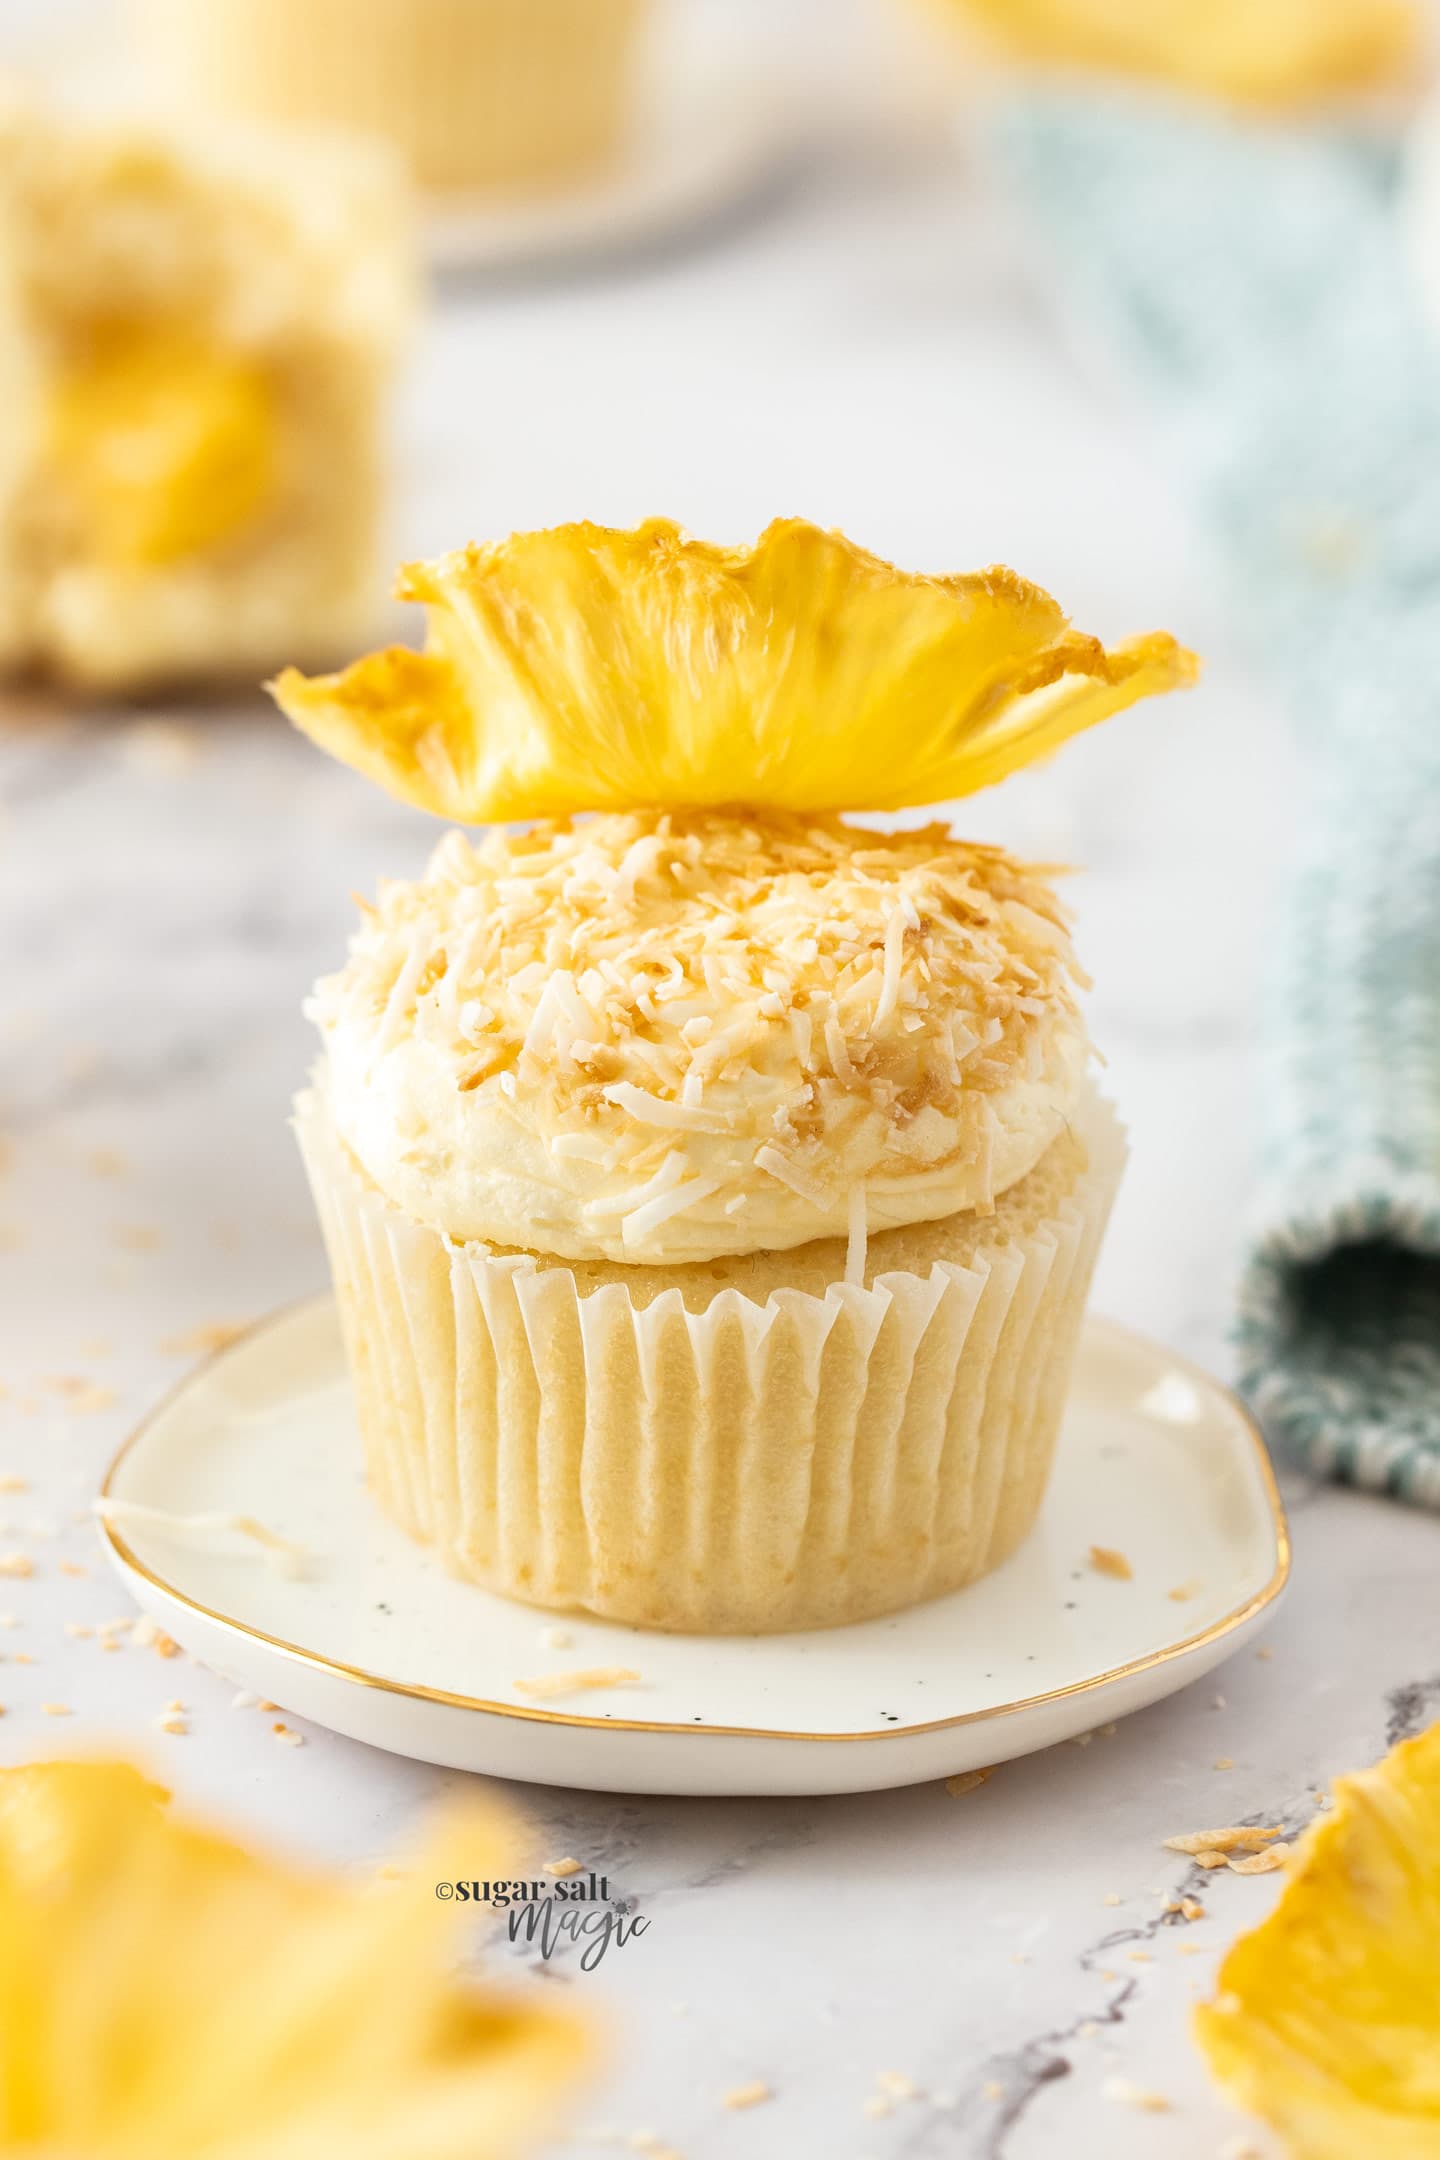 Closeup of a cupcake coated with coconut and topped with pineapple